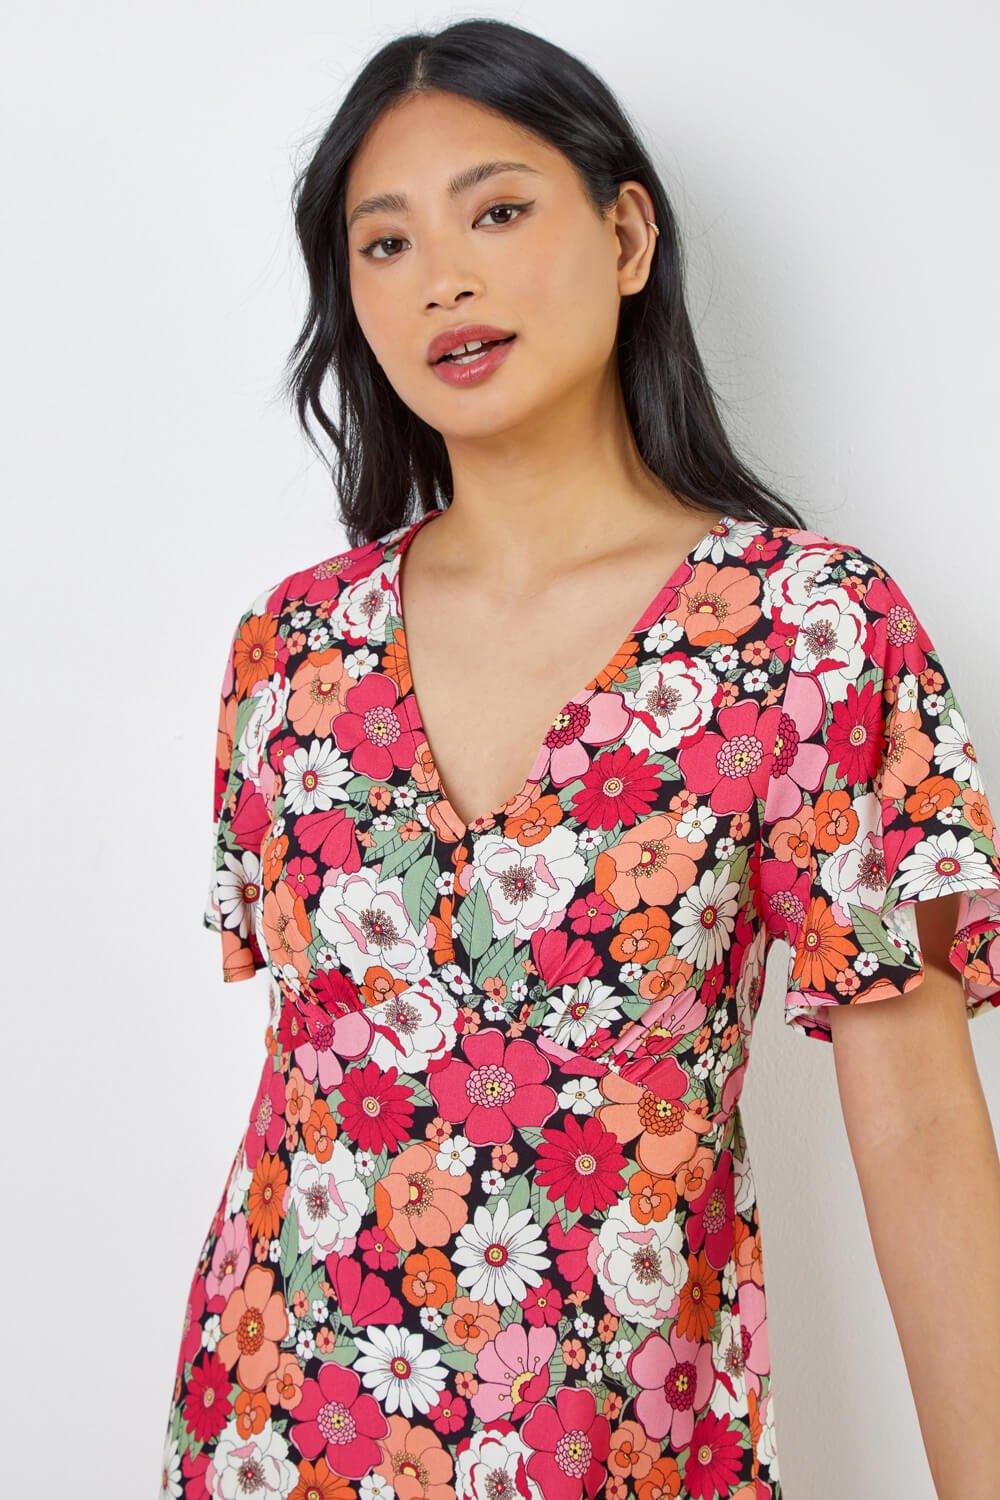 CORAL Petite Floral Print Flute Sleeve Dress, Image 4 of 5